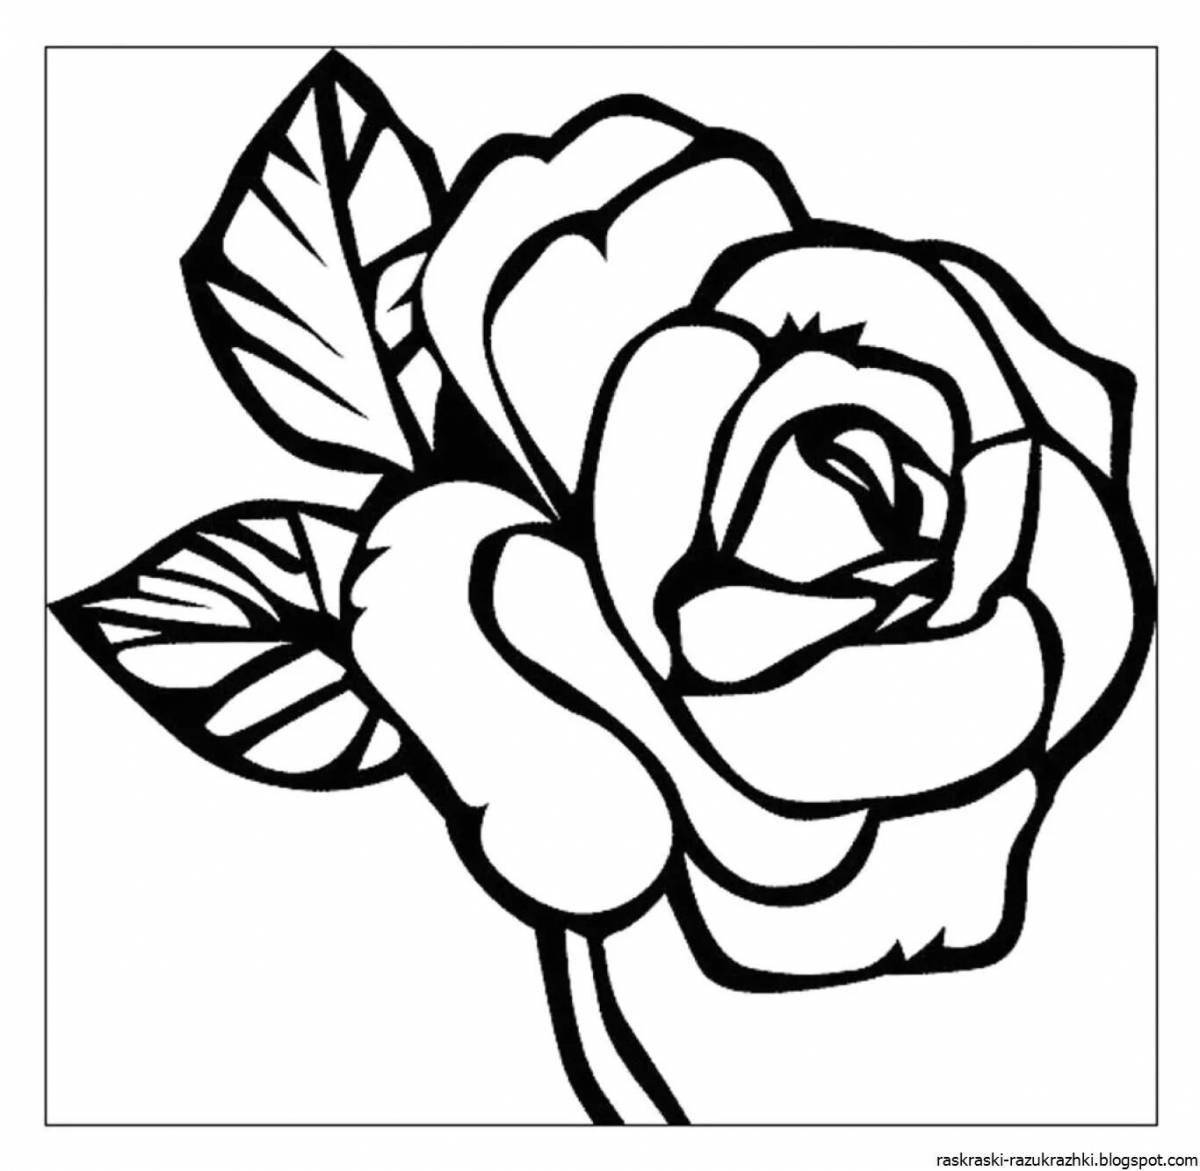 Dramatic coloring drawing of a rose